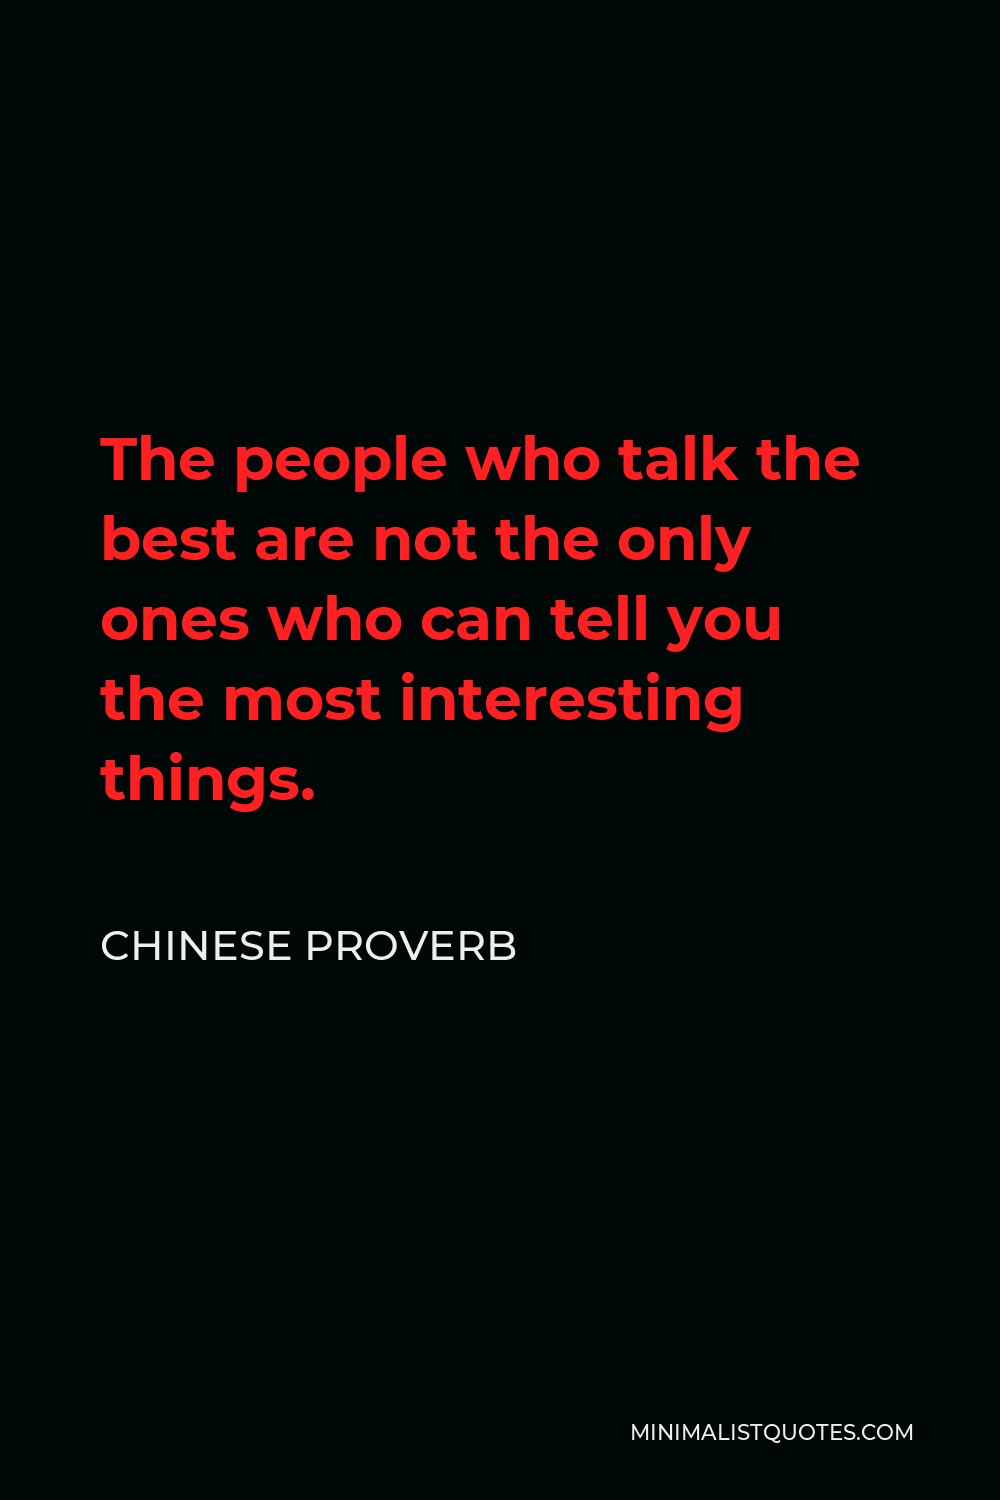 Chinese Proverb Quote - The people who talk the best are not the only ones who can tell you the most interesting things.